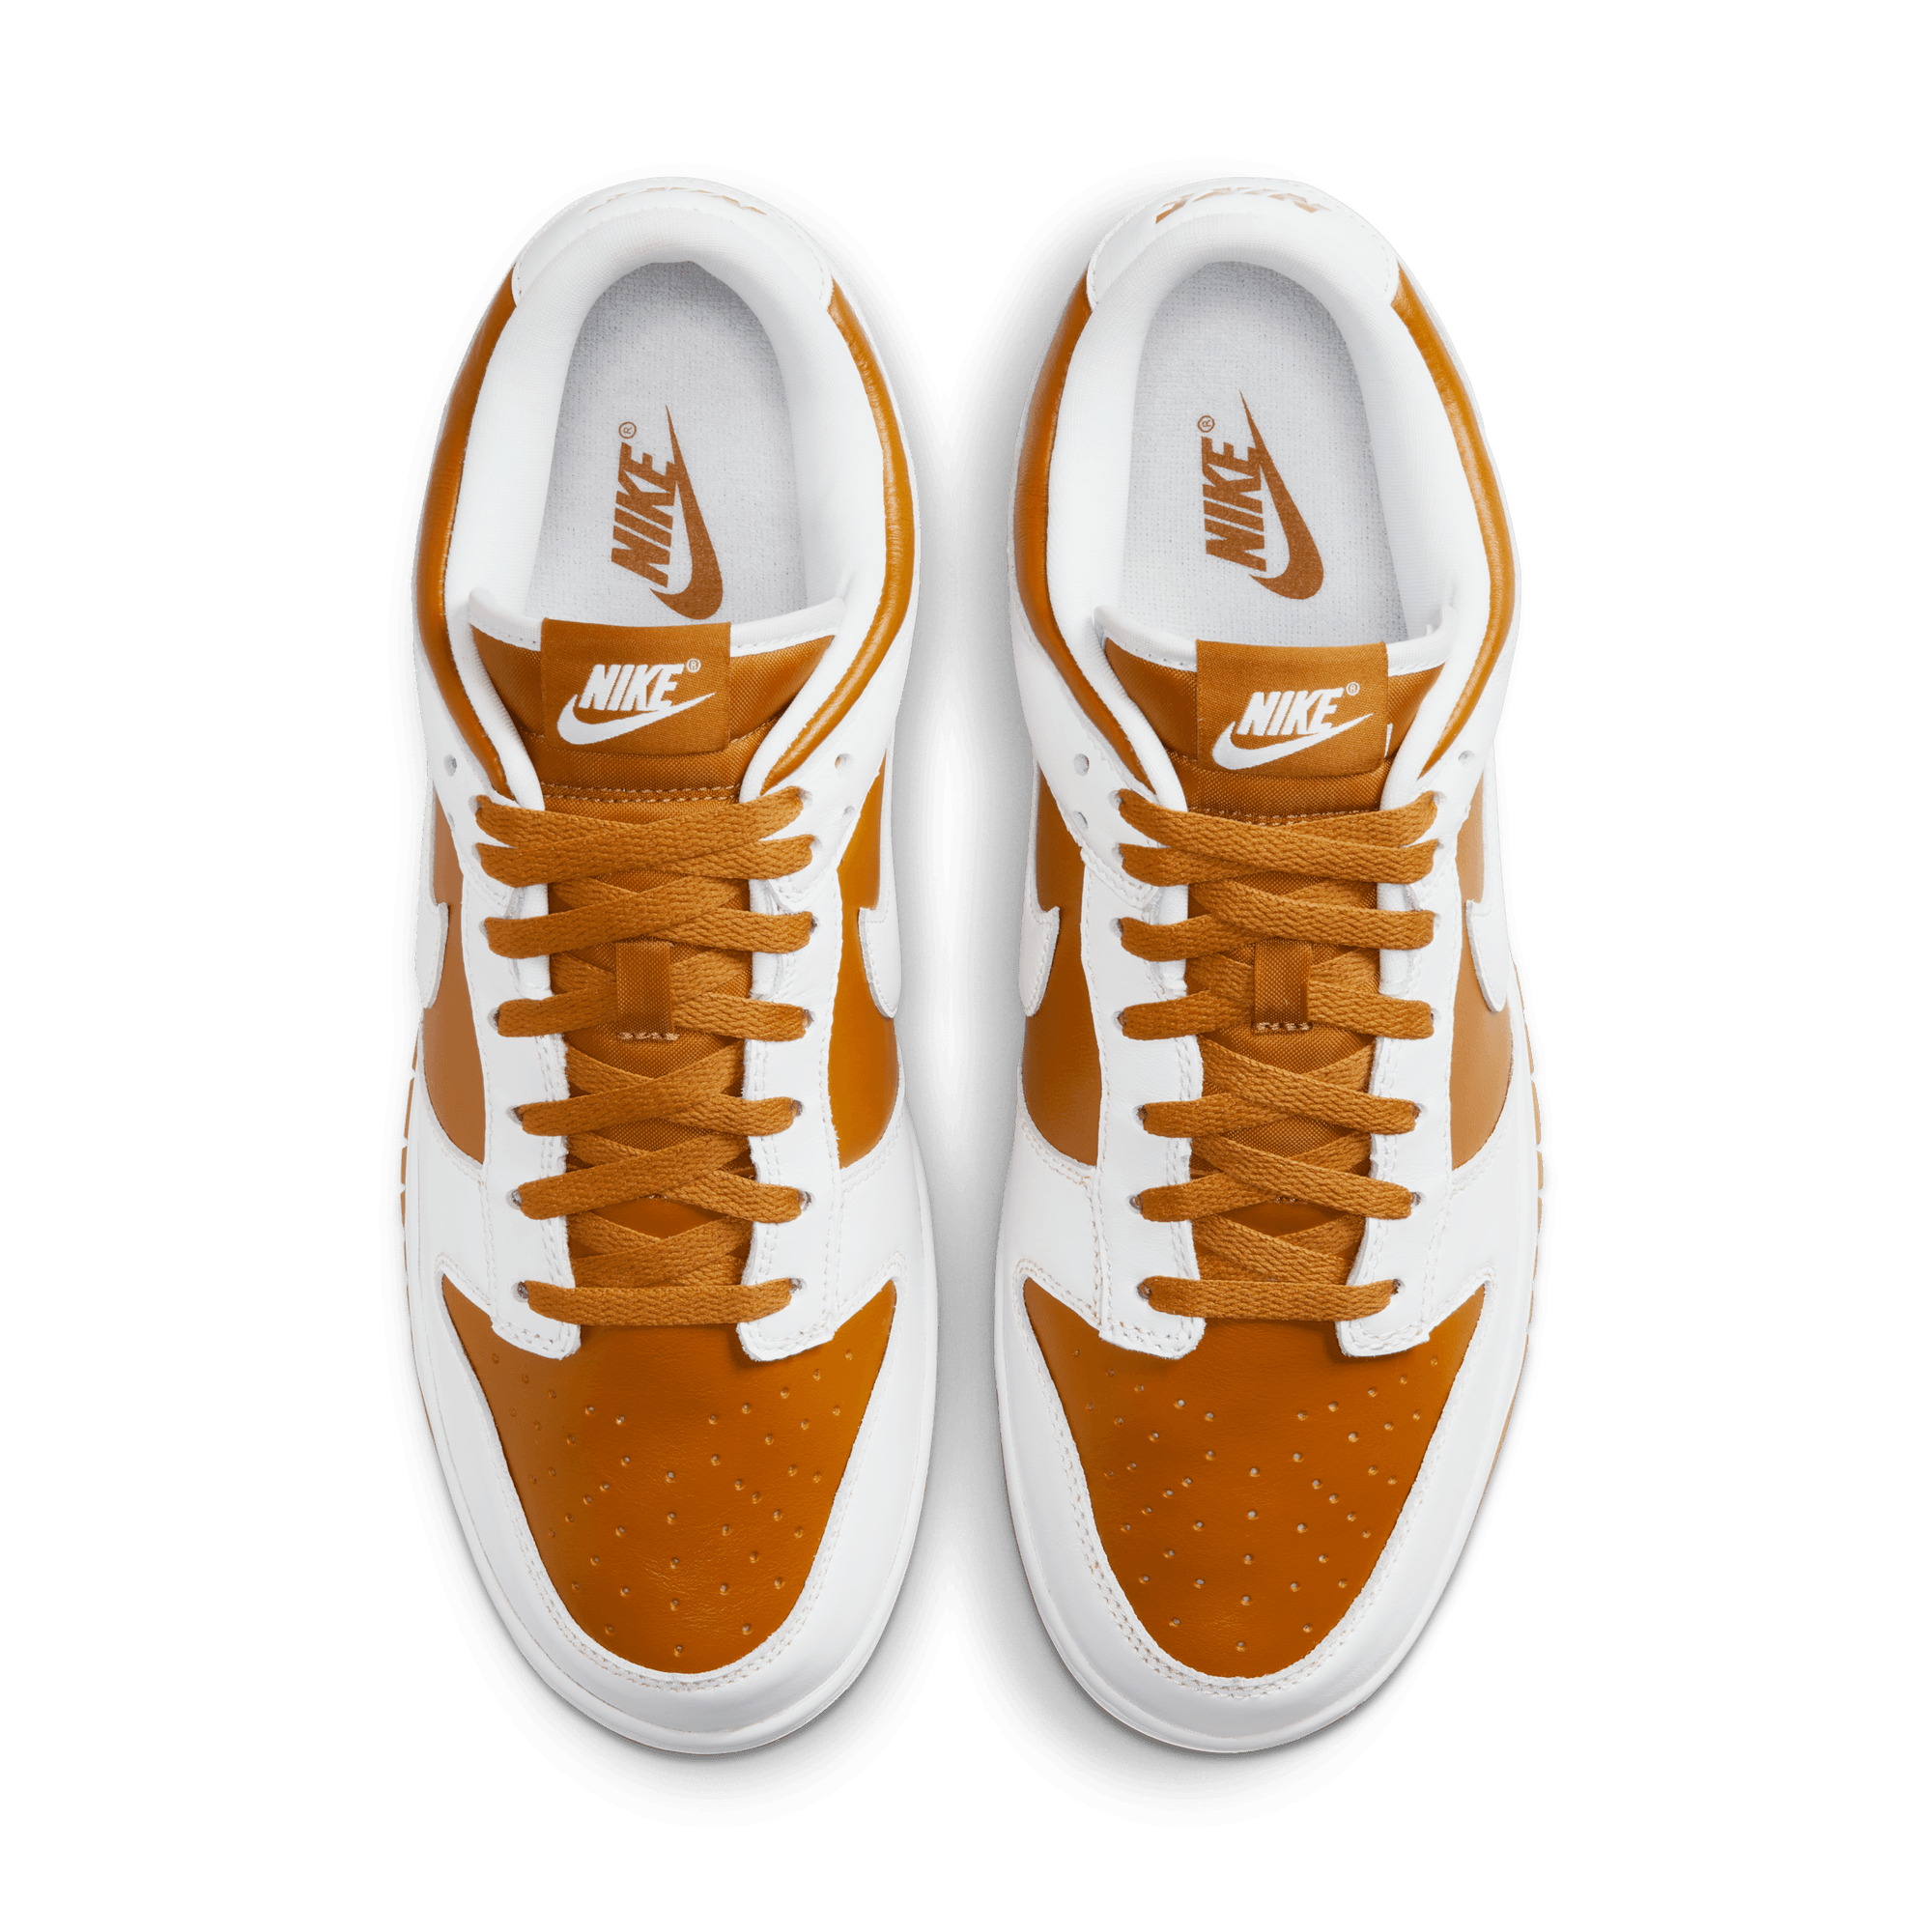 DUNK LOW QS "REVERSE CURRY"